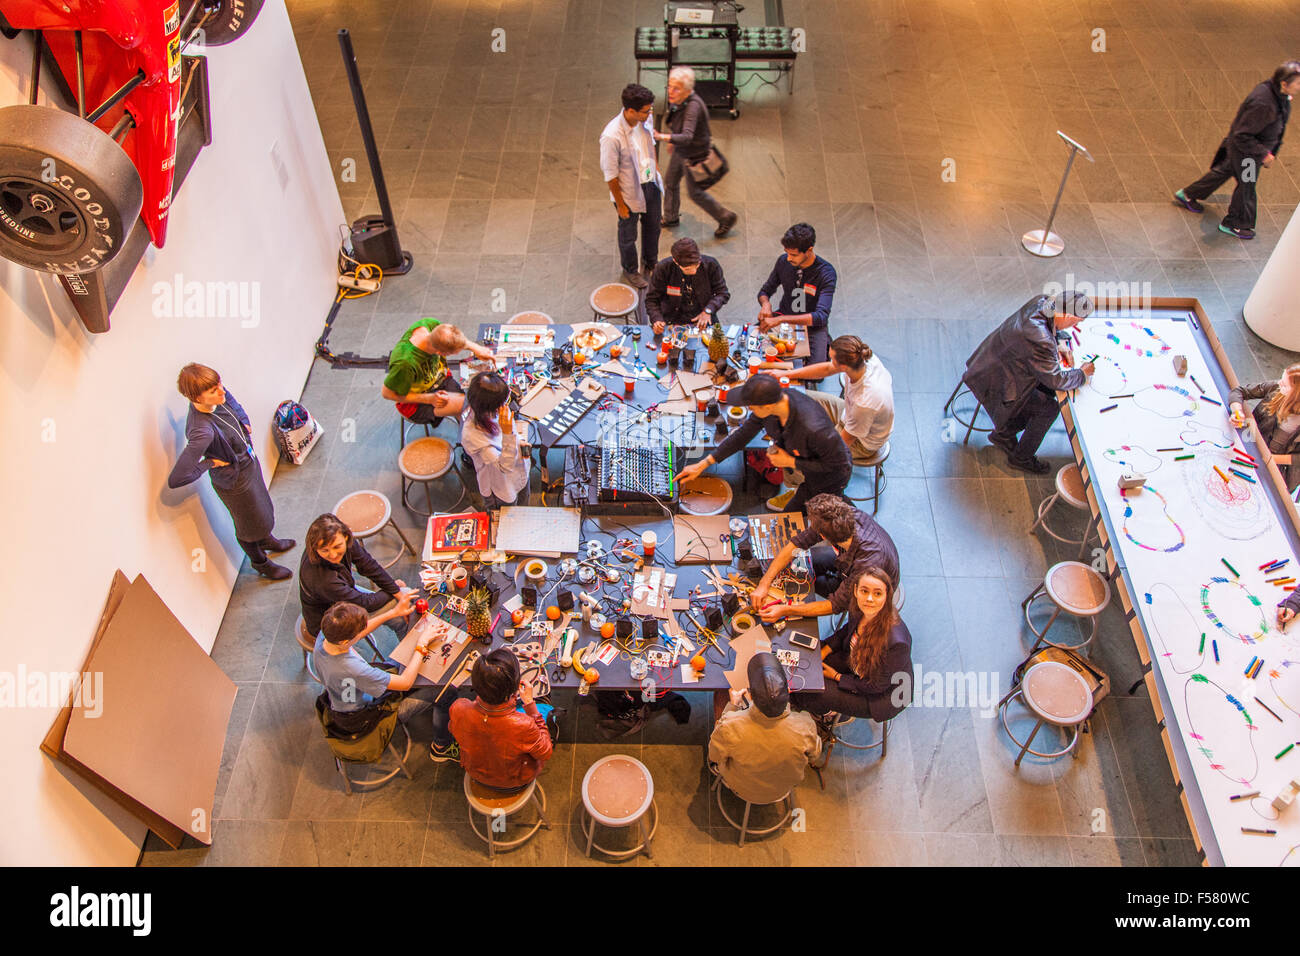 MoMA Studio: in Space workshop. MoMA The Museum of Modern Art, New York city, United States of America Stock Photo Alamy